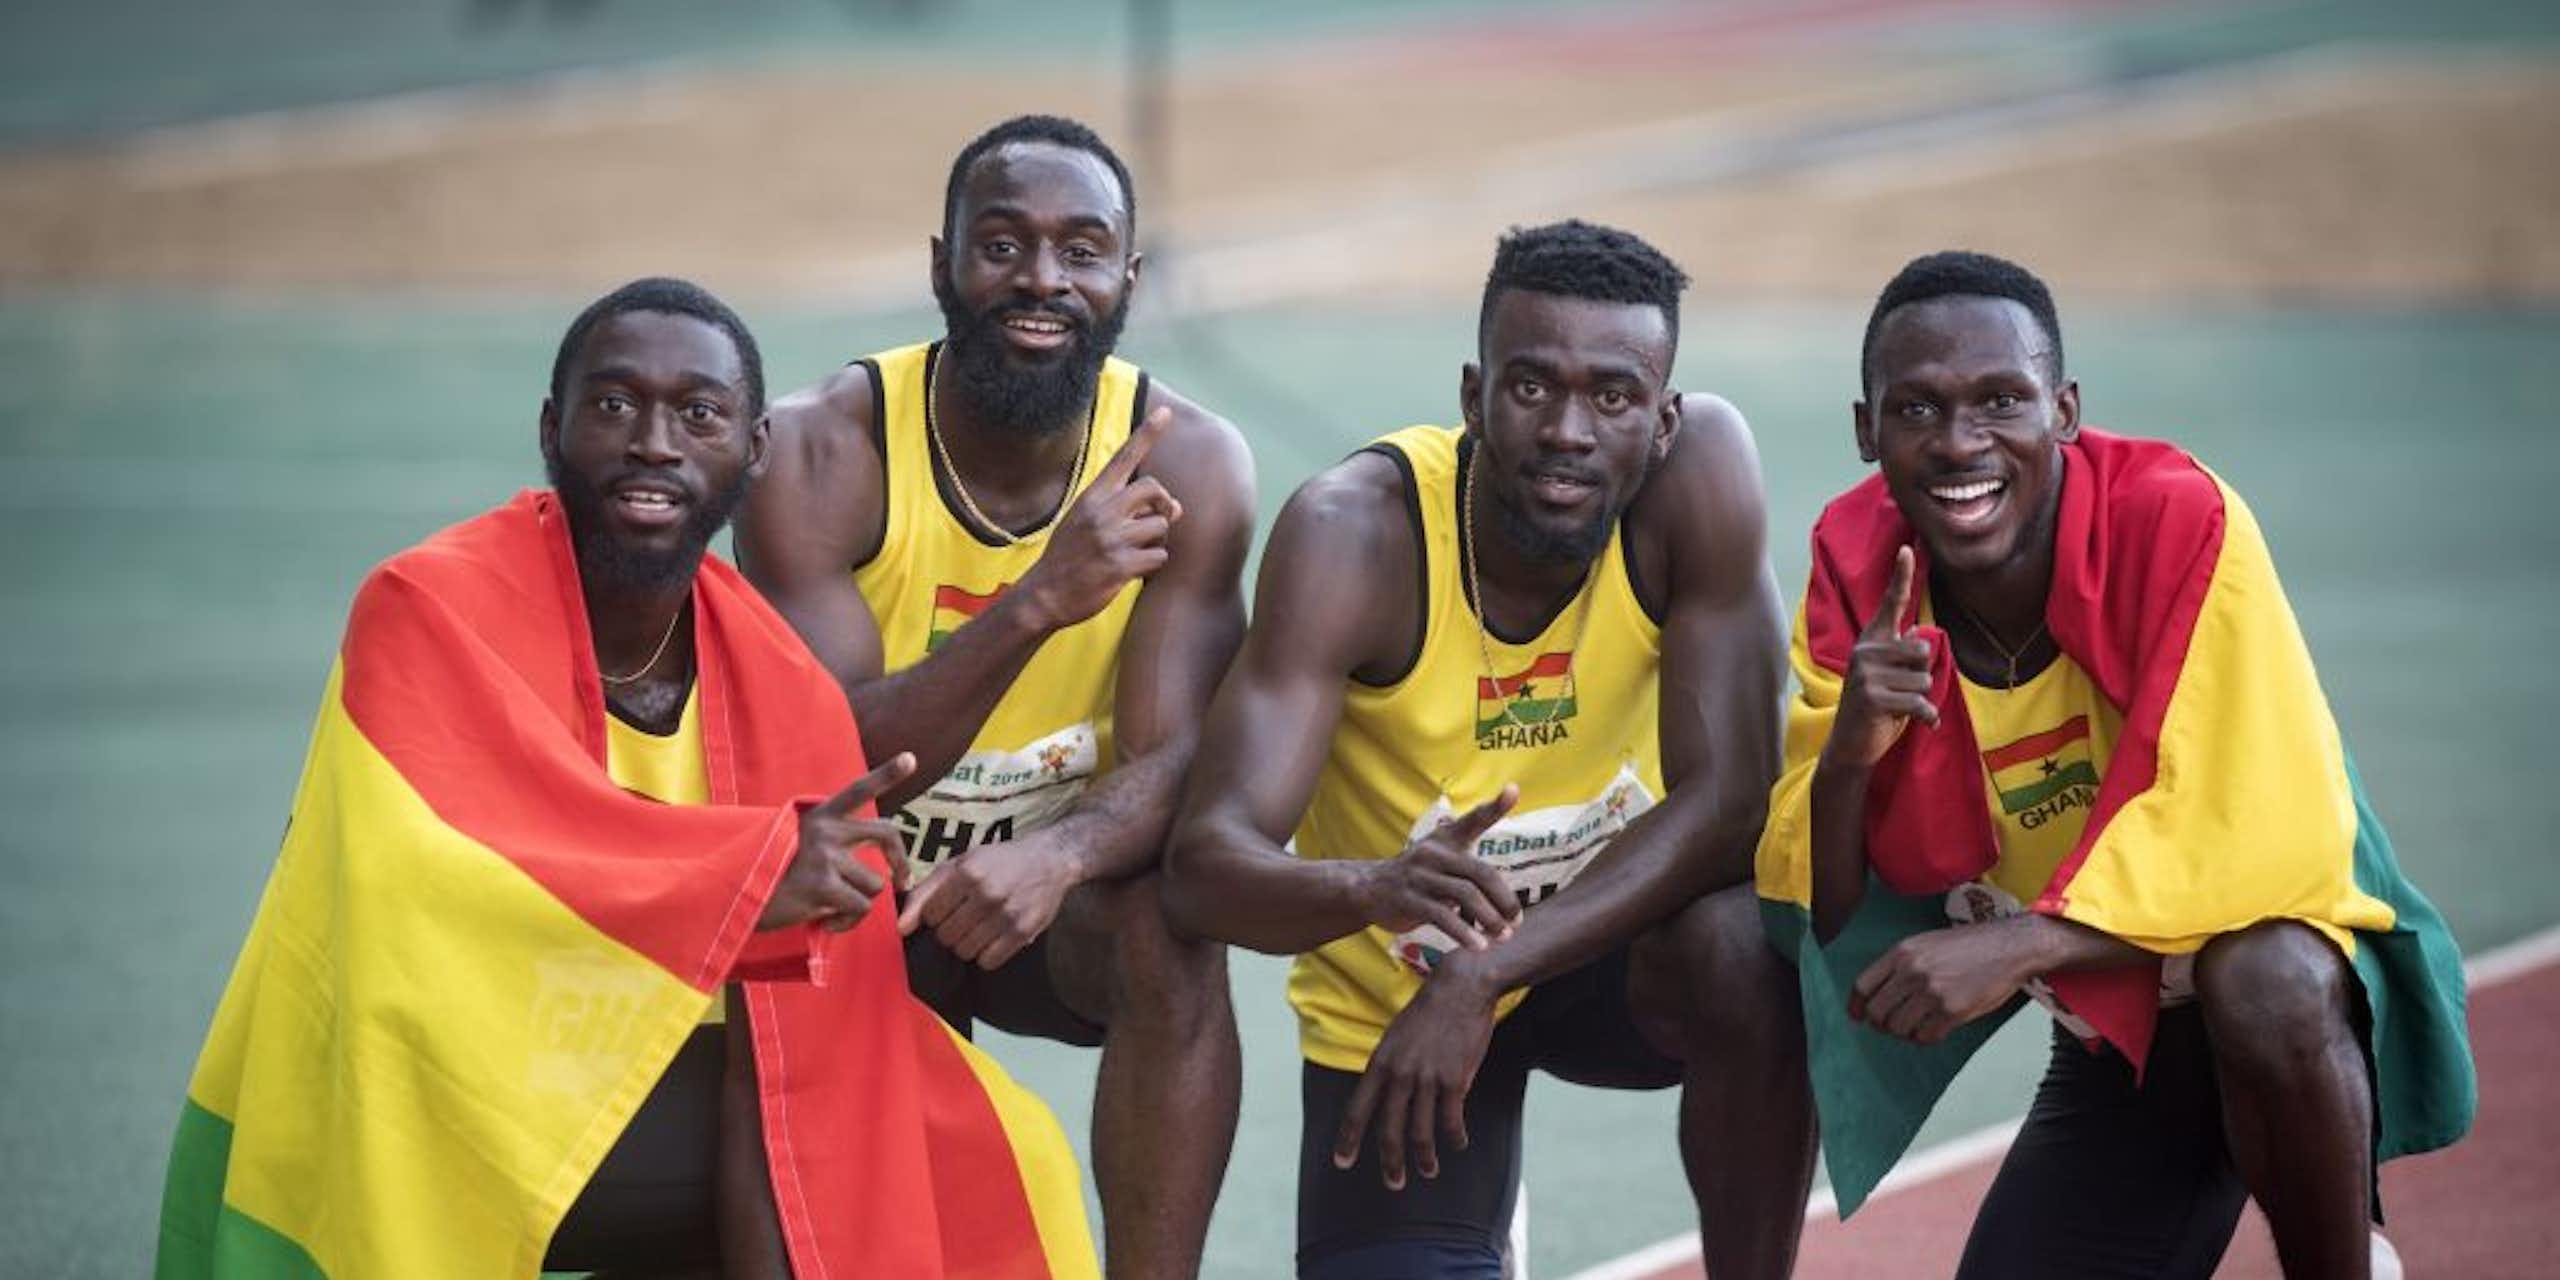 Four men in athletics gear kneel and crouch on a running track, two of them draped in the green, red and yellow flags of Ghana.